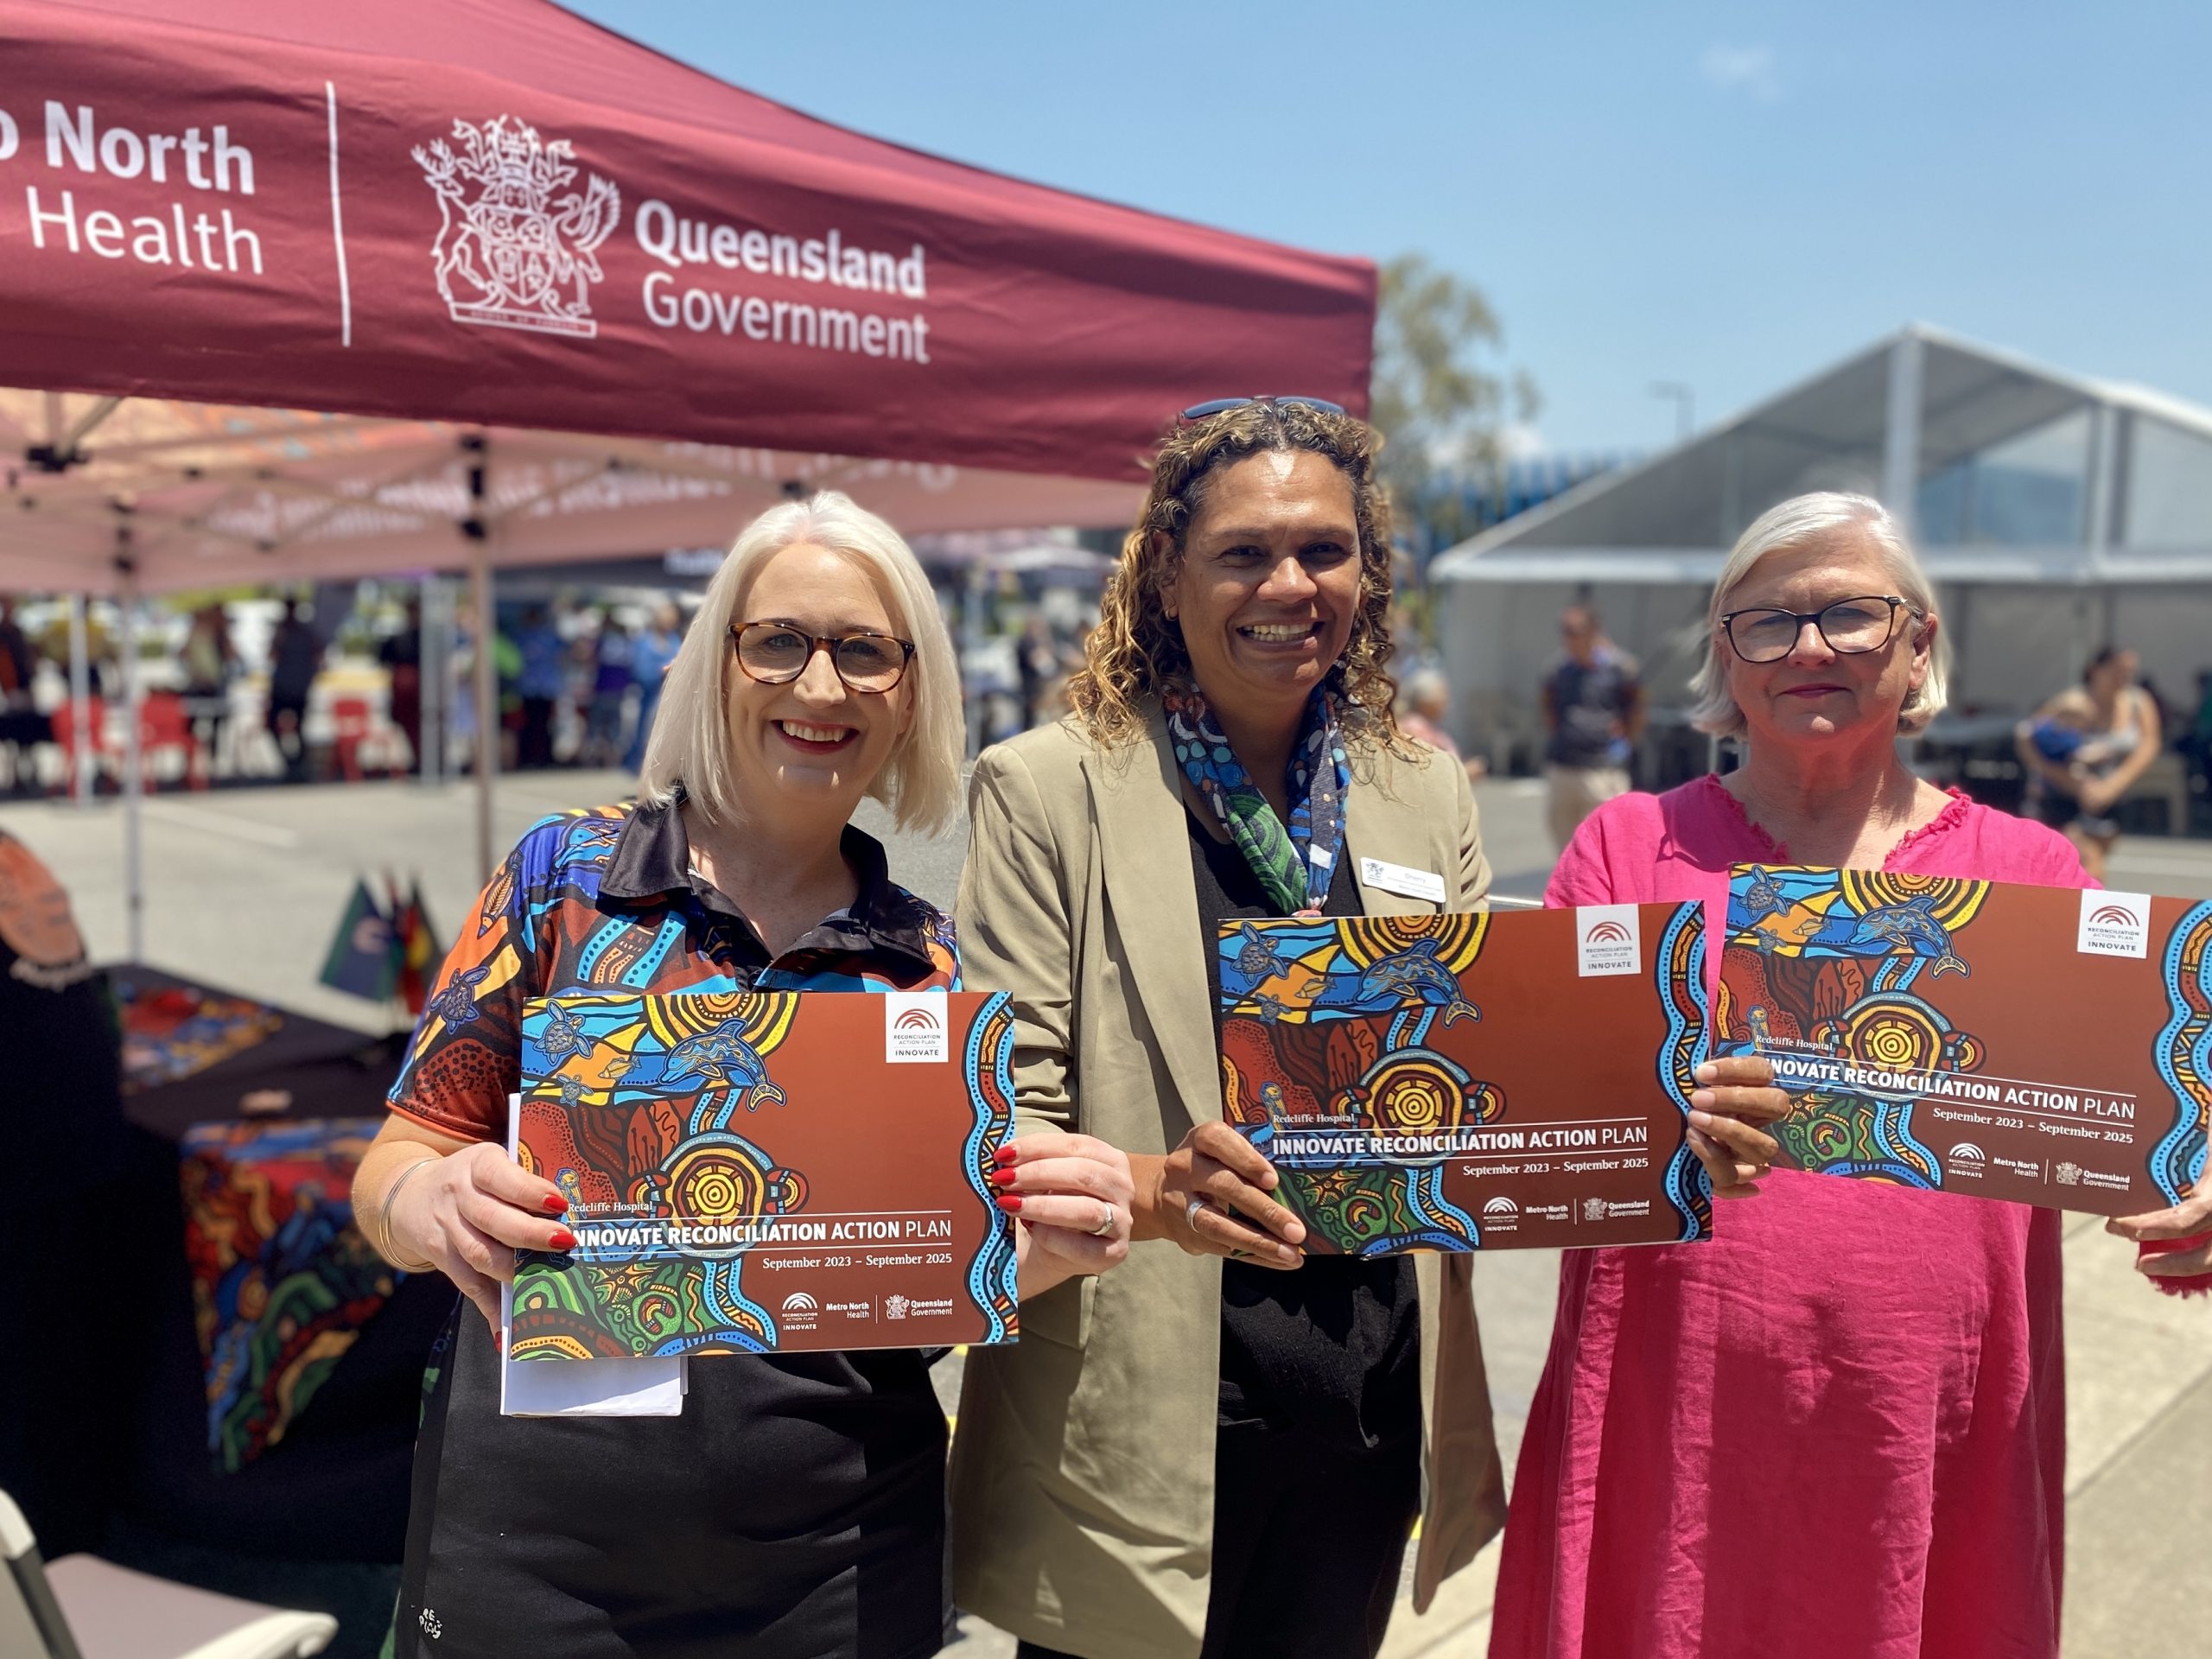 Three women hold copies of the Redcliffe Hospital Reconciliation Action Plan